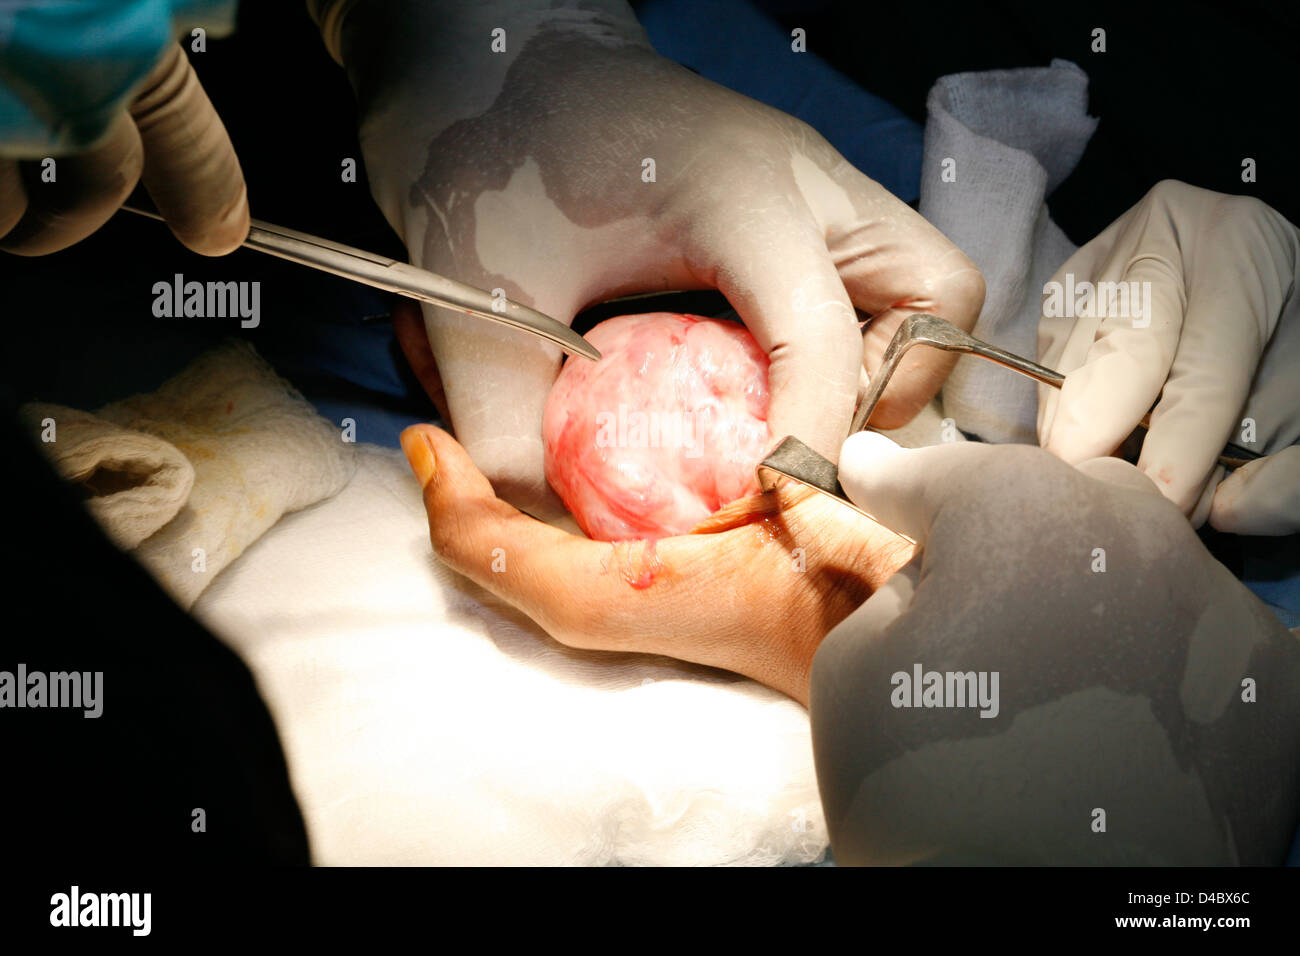 Surgeons operating to remove neurofibroma tumor from patient's hand Stock Photo